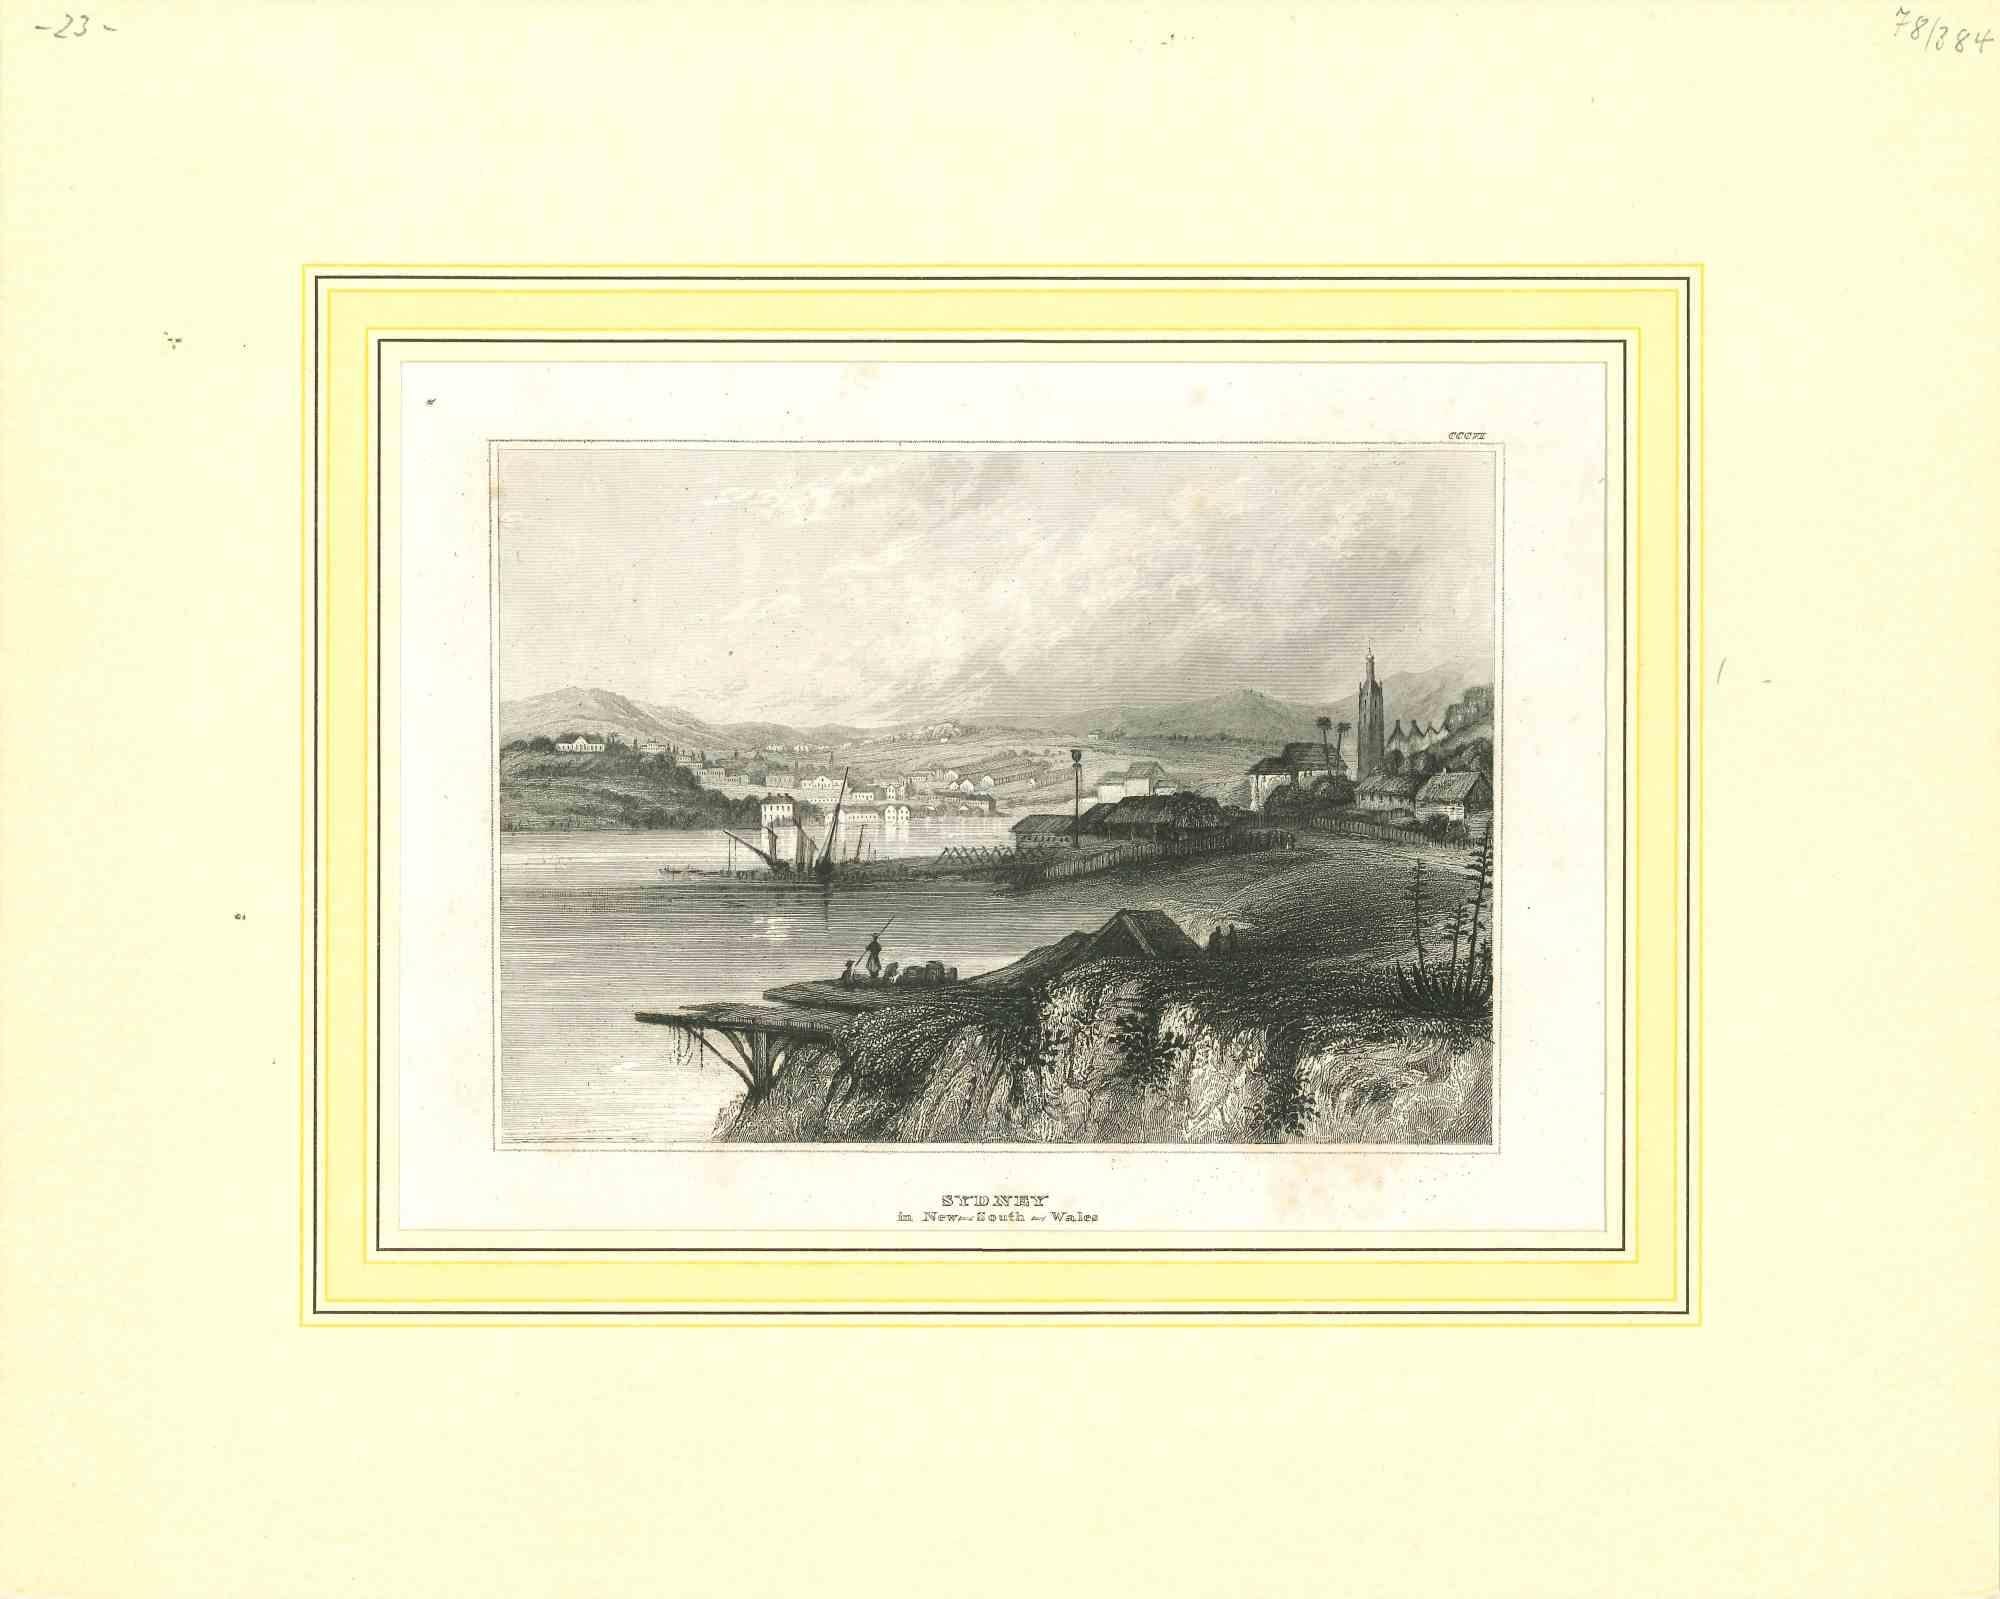 Unknown Figurative Print - Ancient View of Sydney - Original Lithograph - Mid-19th Century